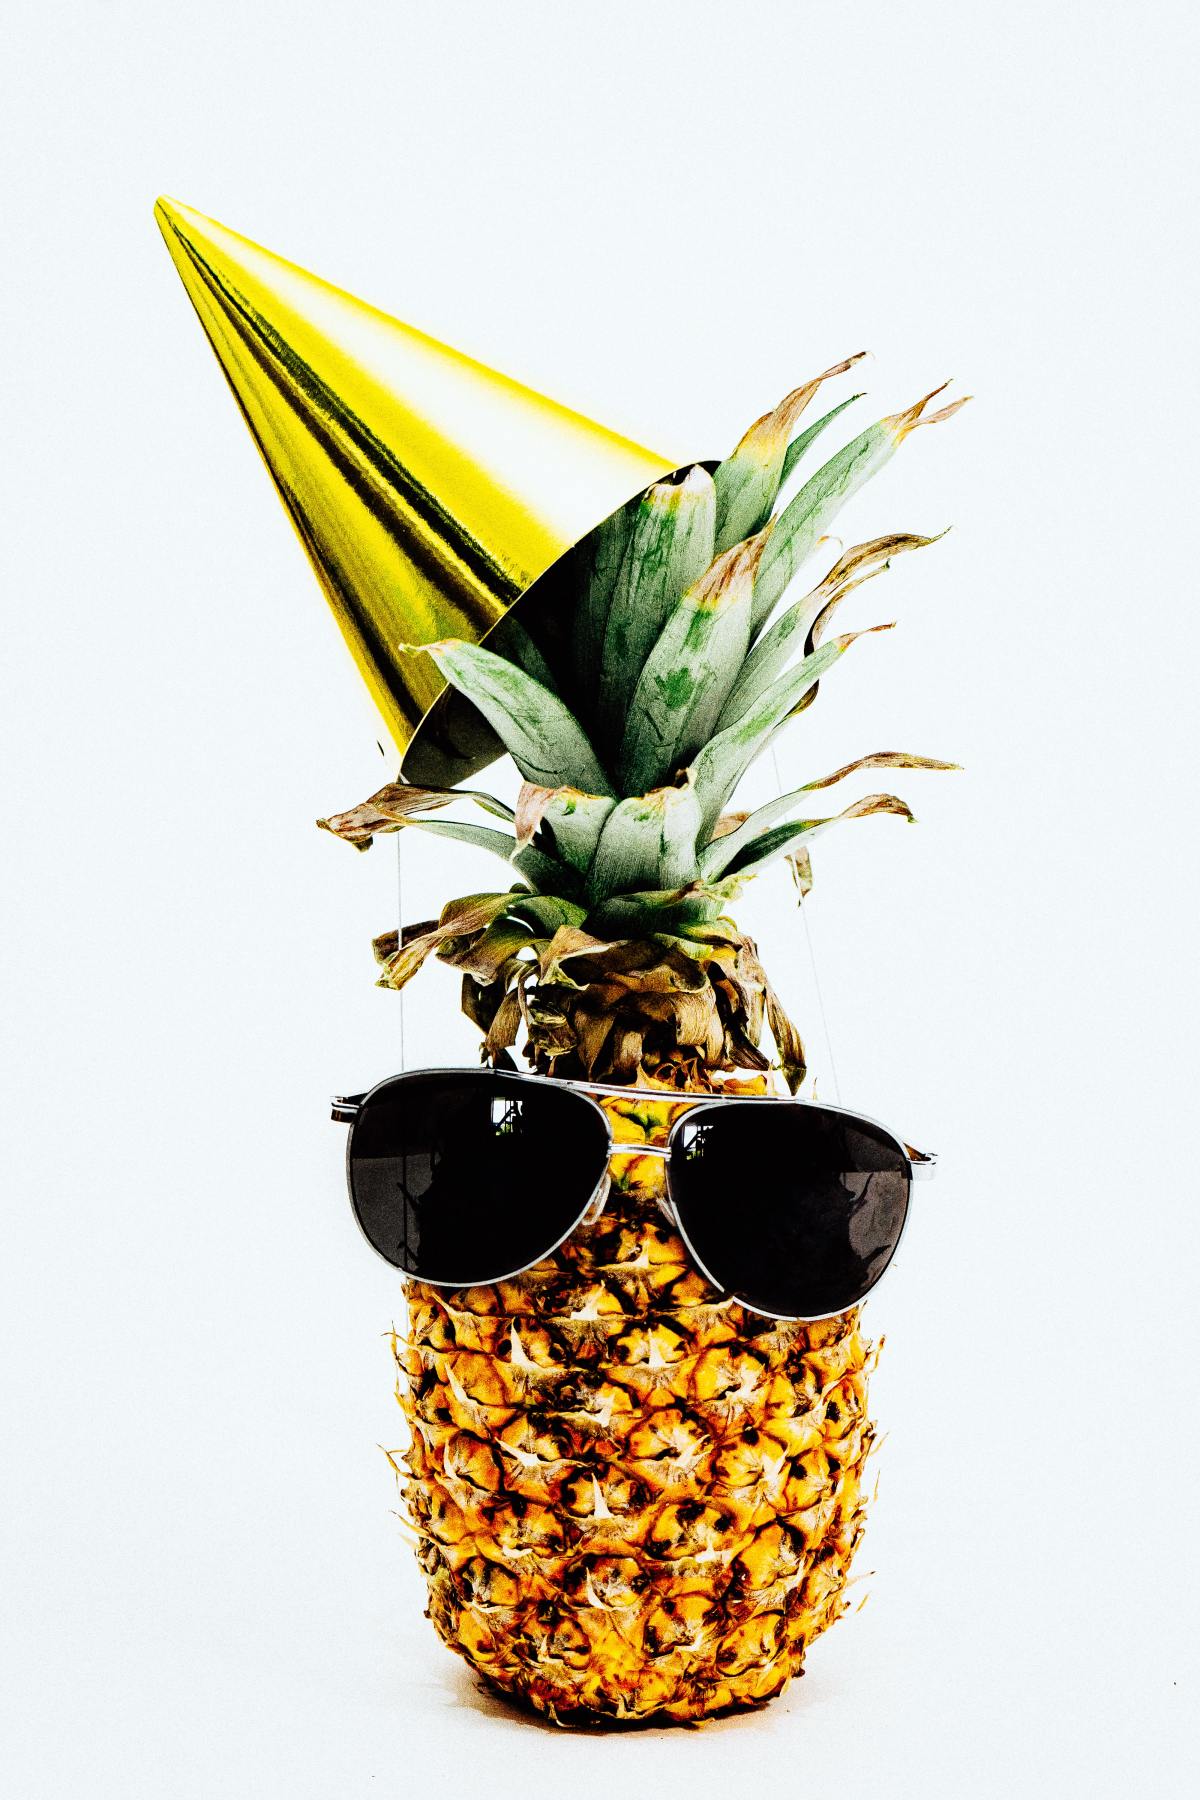 A pineapple with a party hat and sunglasses on